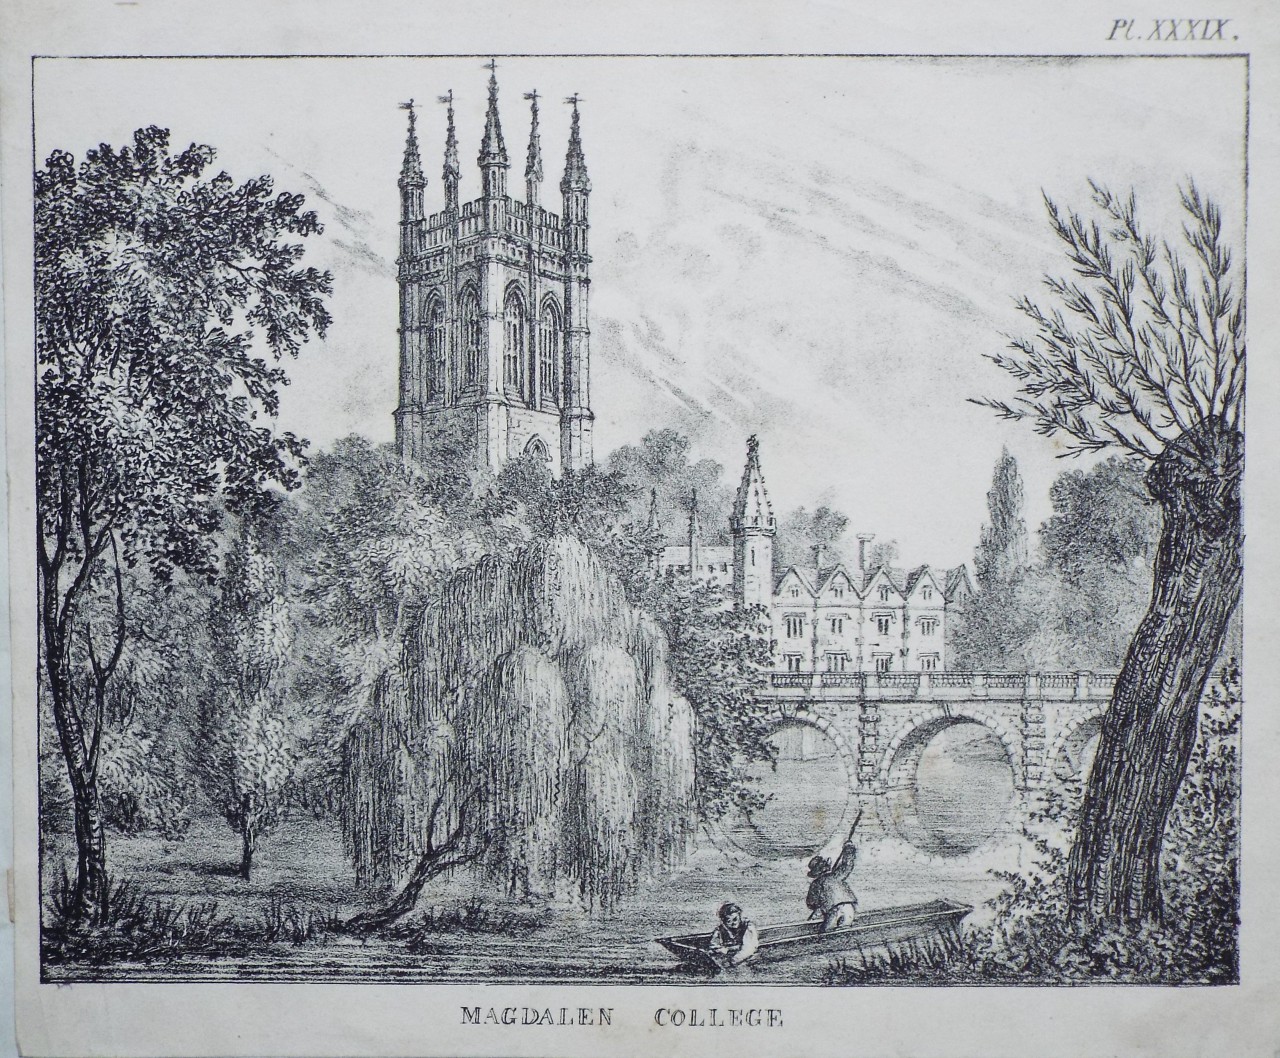 Lithograph - Magdalen College - Whittock